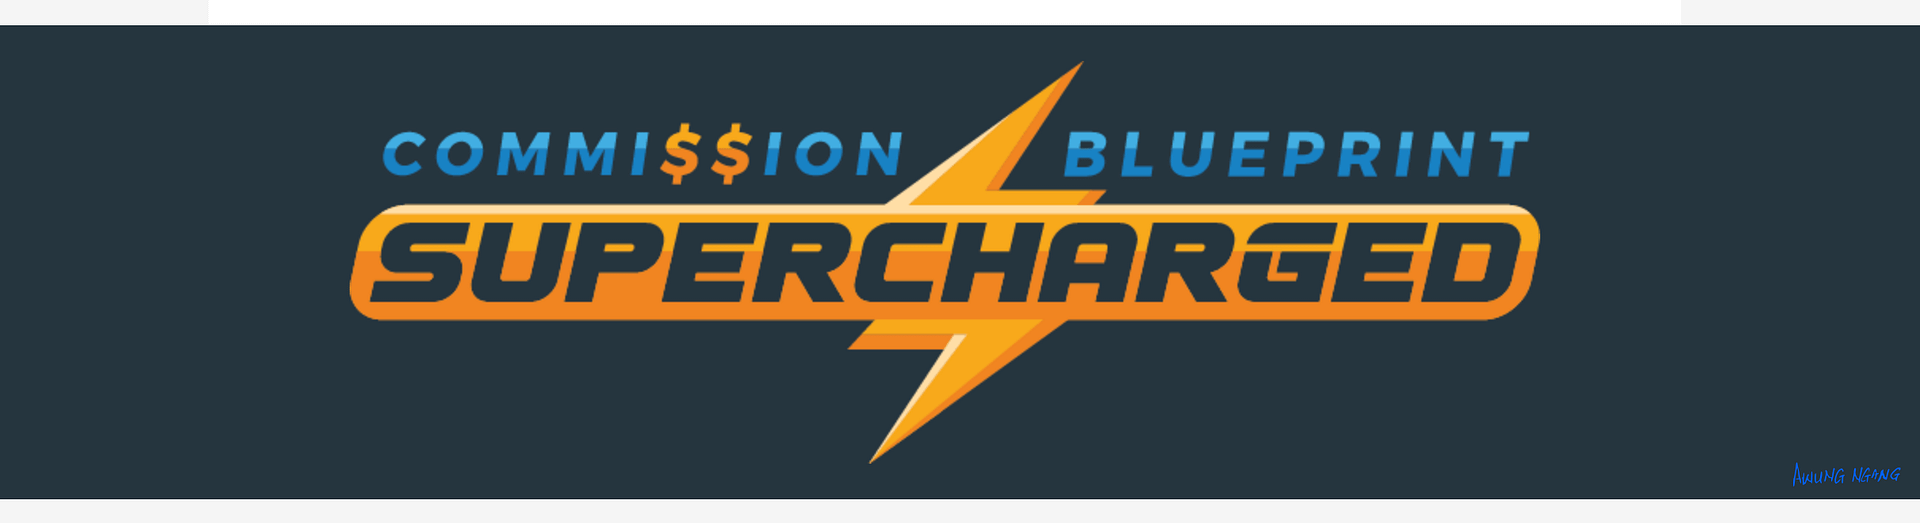 Commission Blueprint Supercharged,instant discounts,Option1,Option2,Option3,payment today,passive income